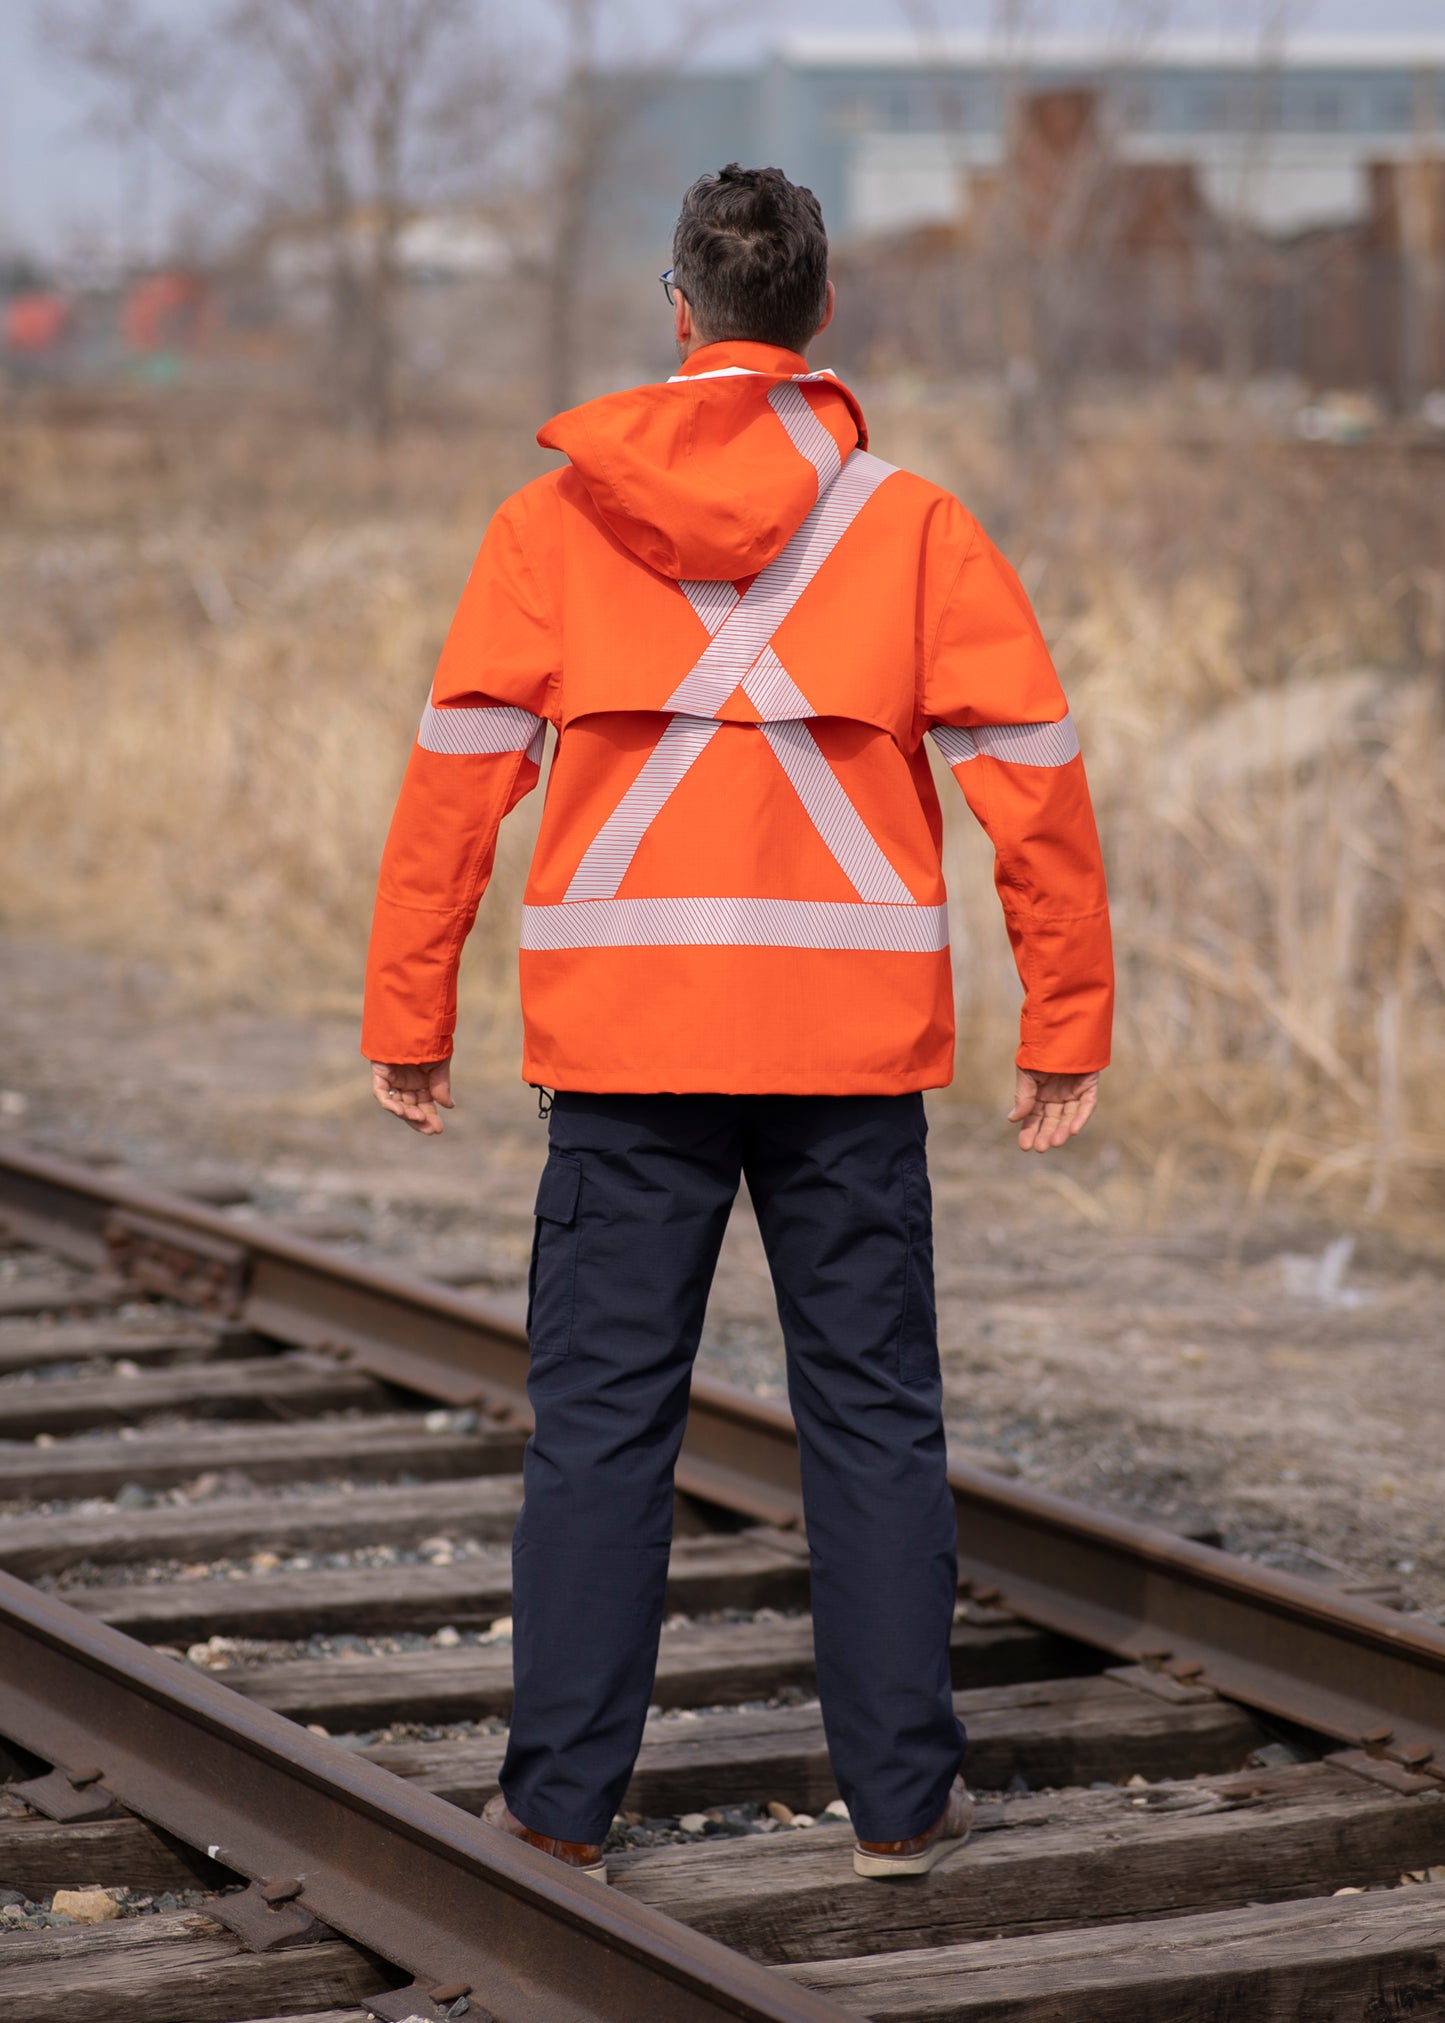 Back view of MWG STORMSHIELD FR Rain Jacket. Image displays the vented back and silver segmented reflective tape in an X pattern to meet high-visibility standard CSA Z96-15. Image shows the detachable hood hanging on the back of the model. Model is wearing MWG STORMSHIELD FR Rain Jacket with navy MWG RIPGUARD FR Utility Pant.